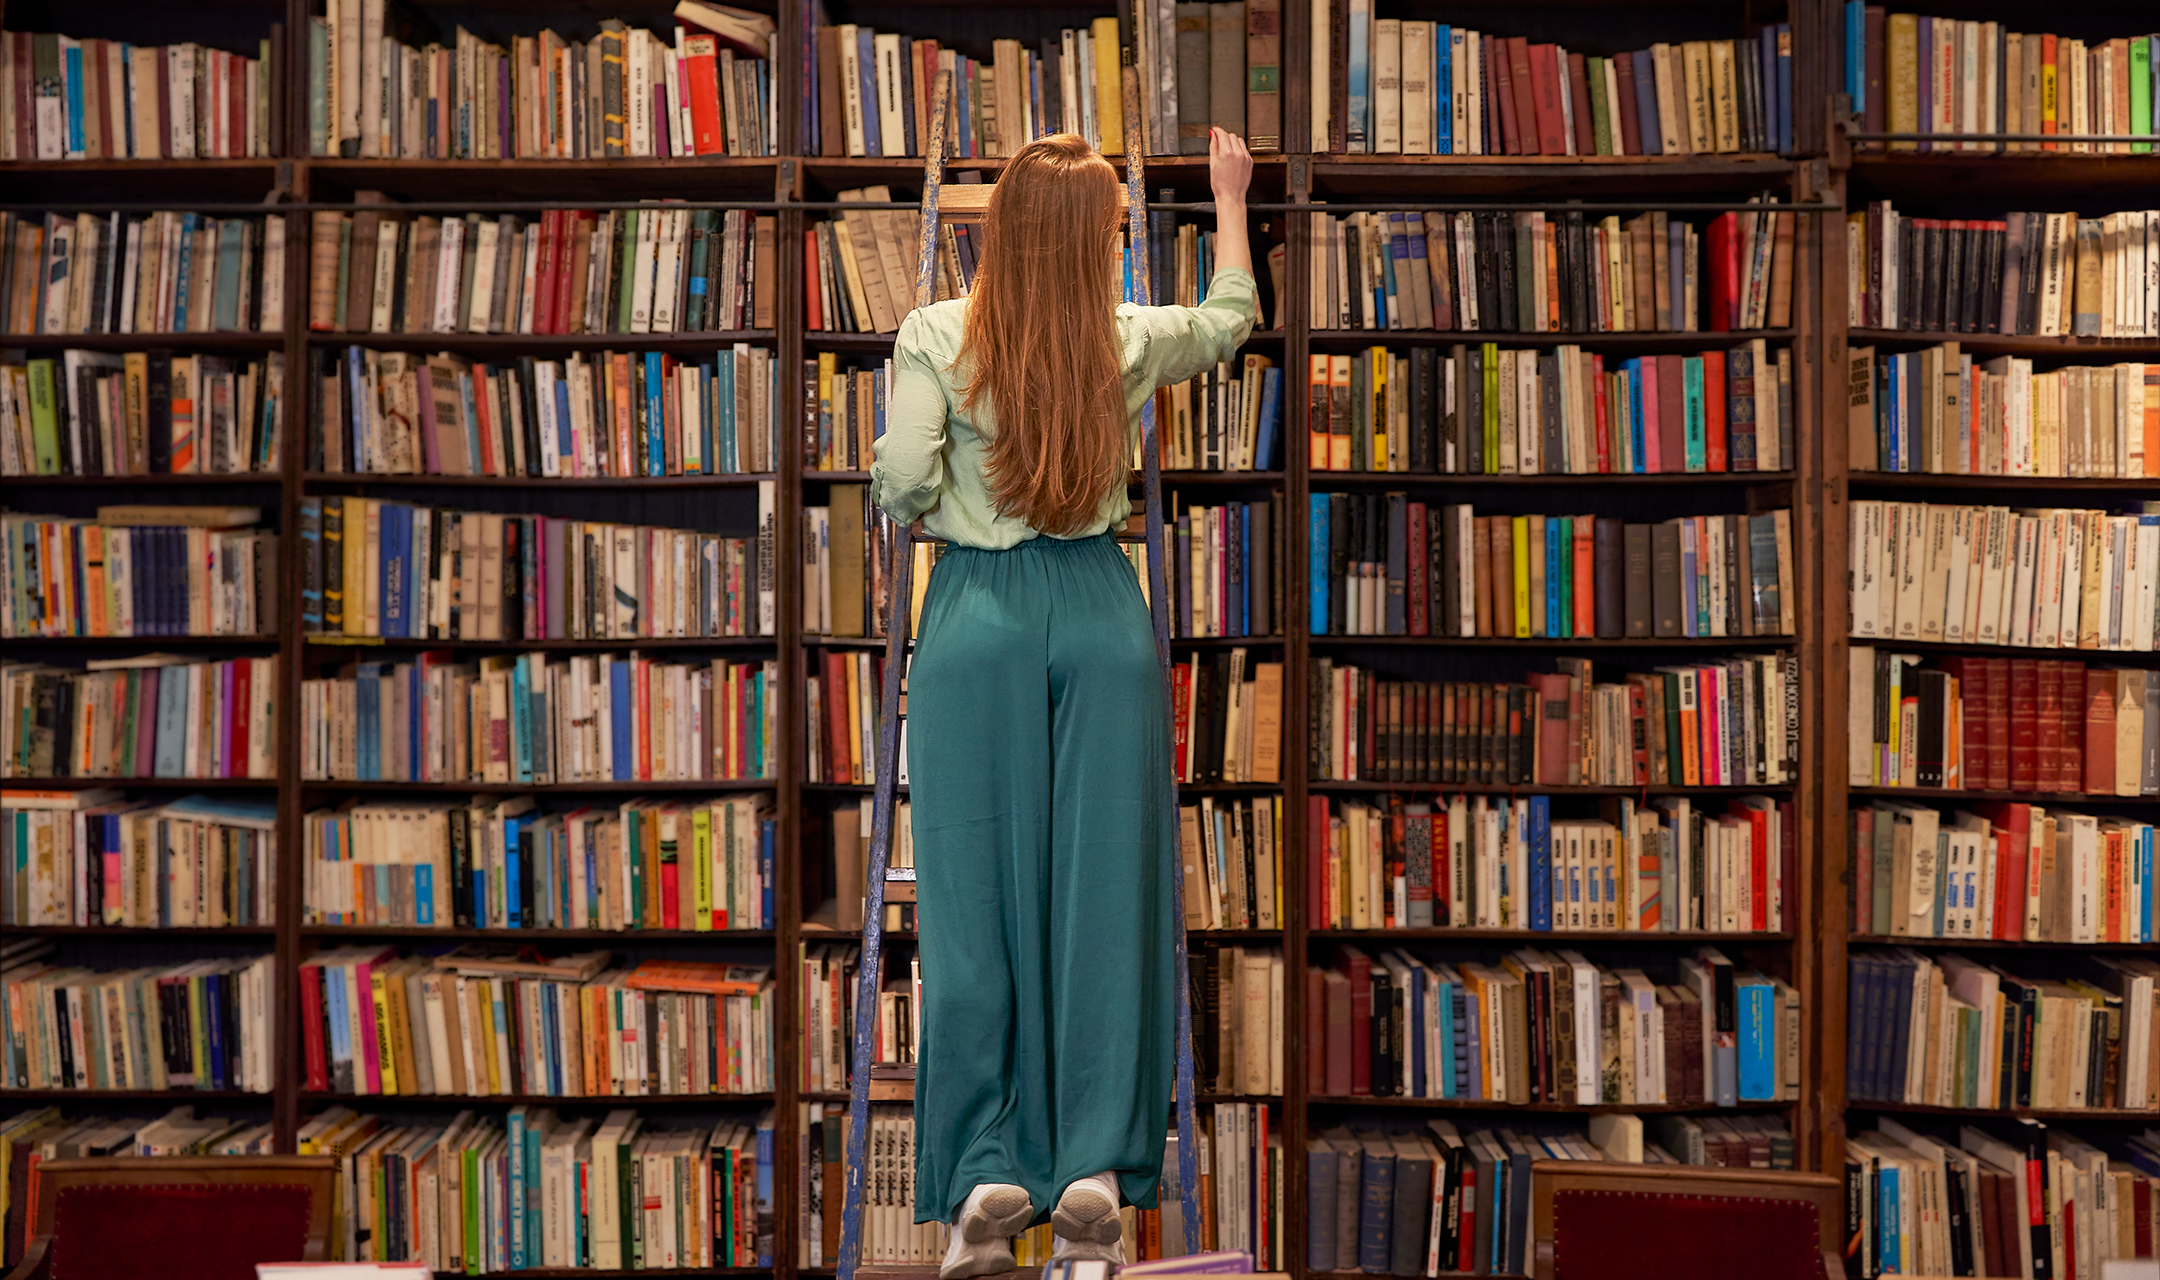 Photo of a young woman, seen from behind, standing on a ladder in front of large shelves of books